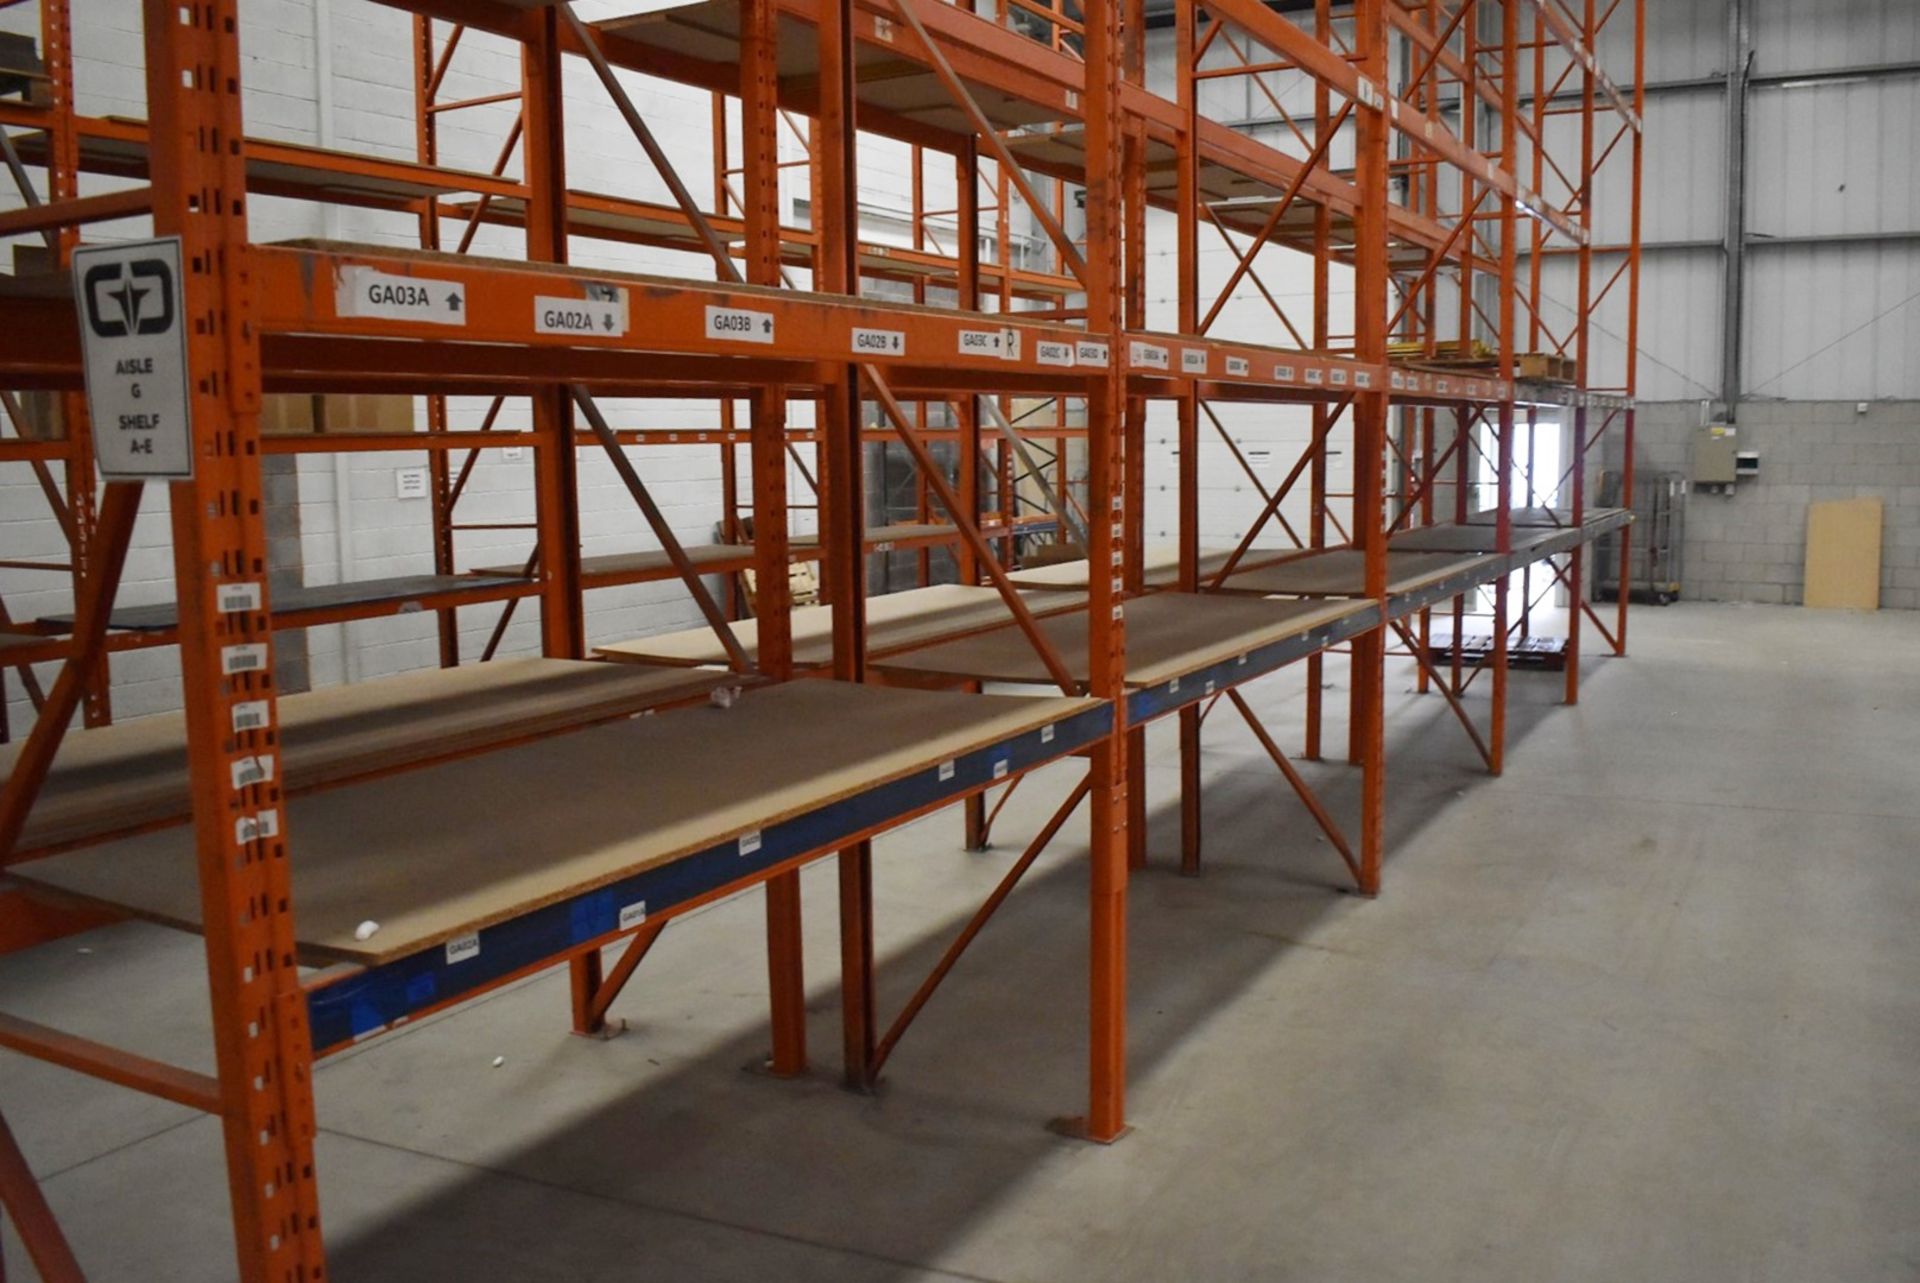 5 x Bays of RediRack Warehouse Pallet Racking - Lot Includes 6 x Uprights and 36 x Crossbeams - - Image 5 of 8